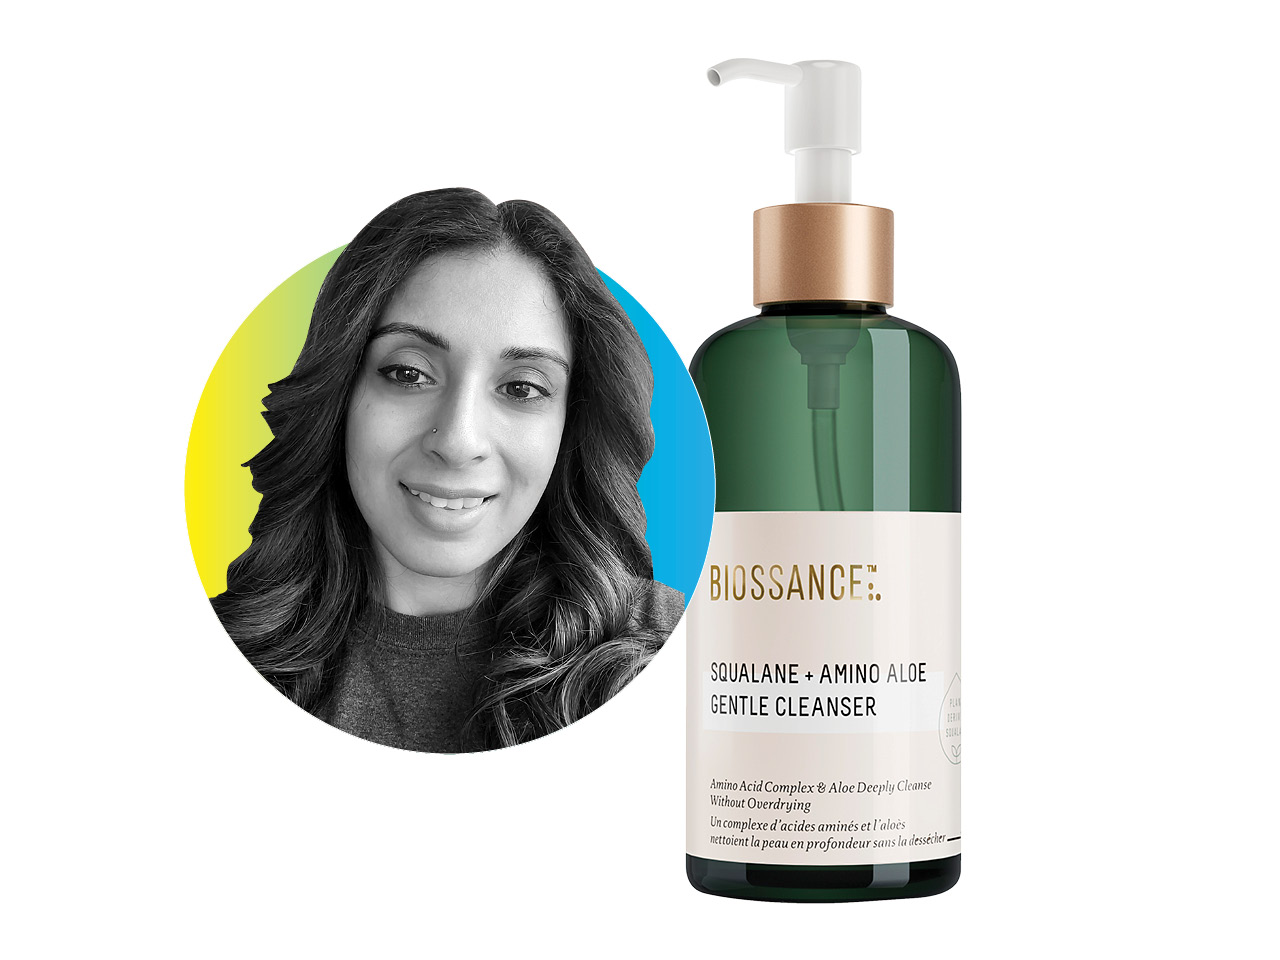 A Chatelaine reader reviews the Biossance Squalane and Aloe cleanser.